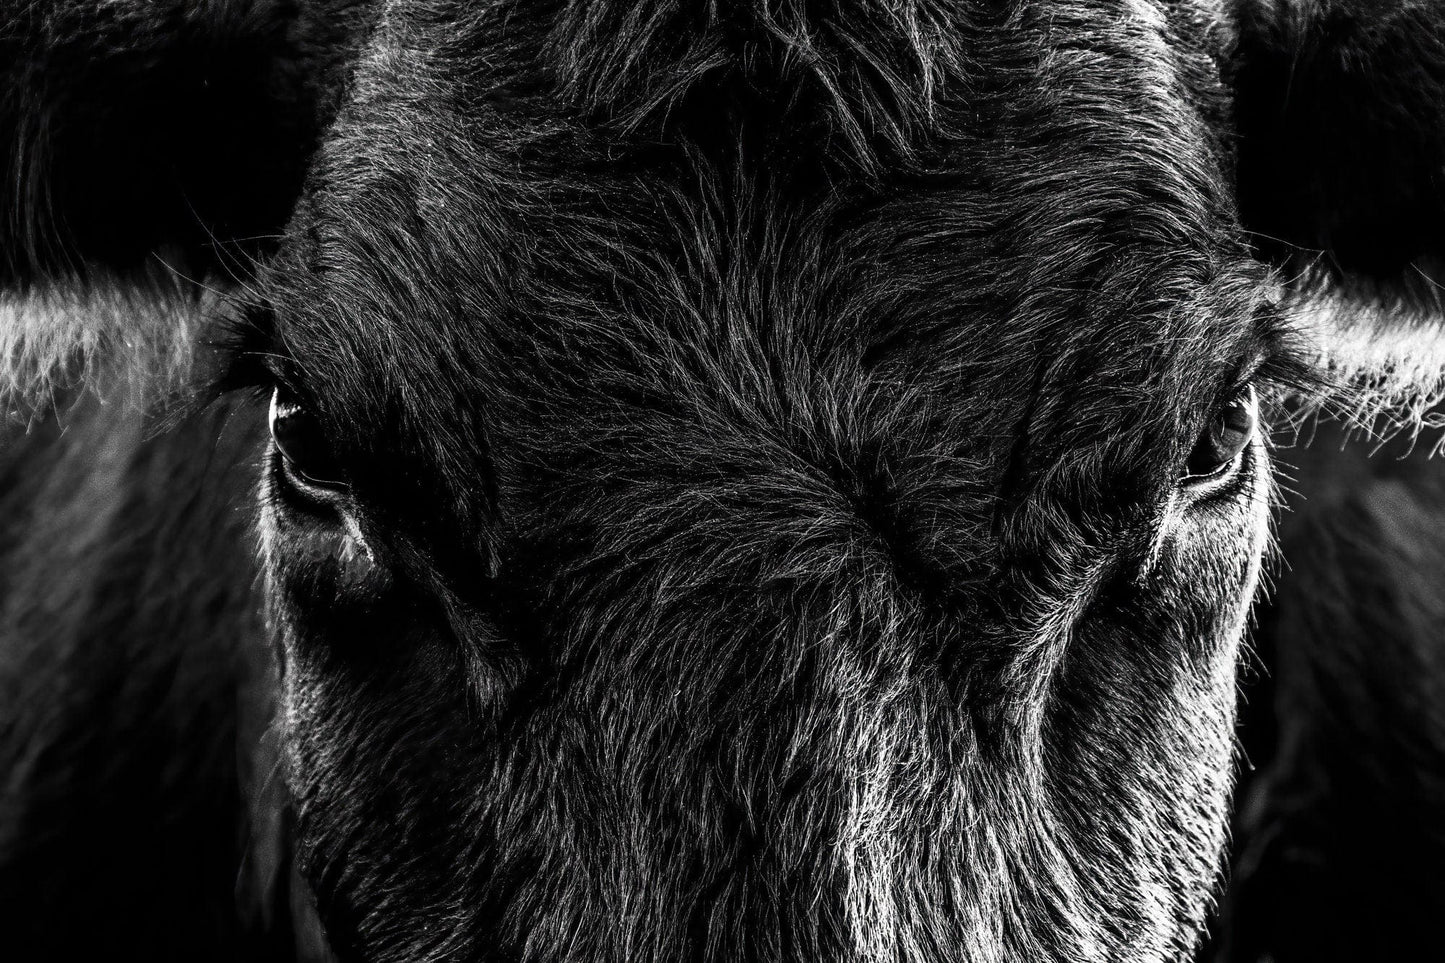 Black Angus Extreme Closeup in Black & White Paper Photo Print / 12 x 18 Inches Wall Art Teri James Photography